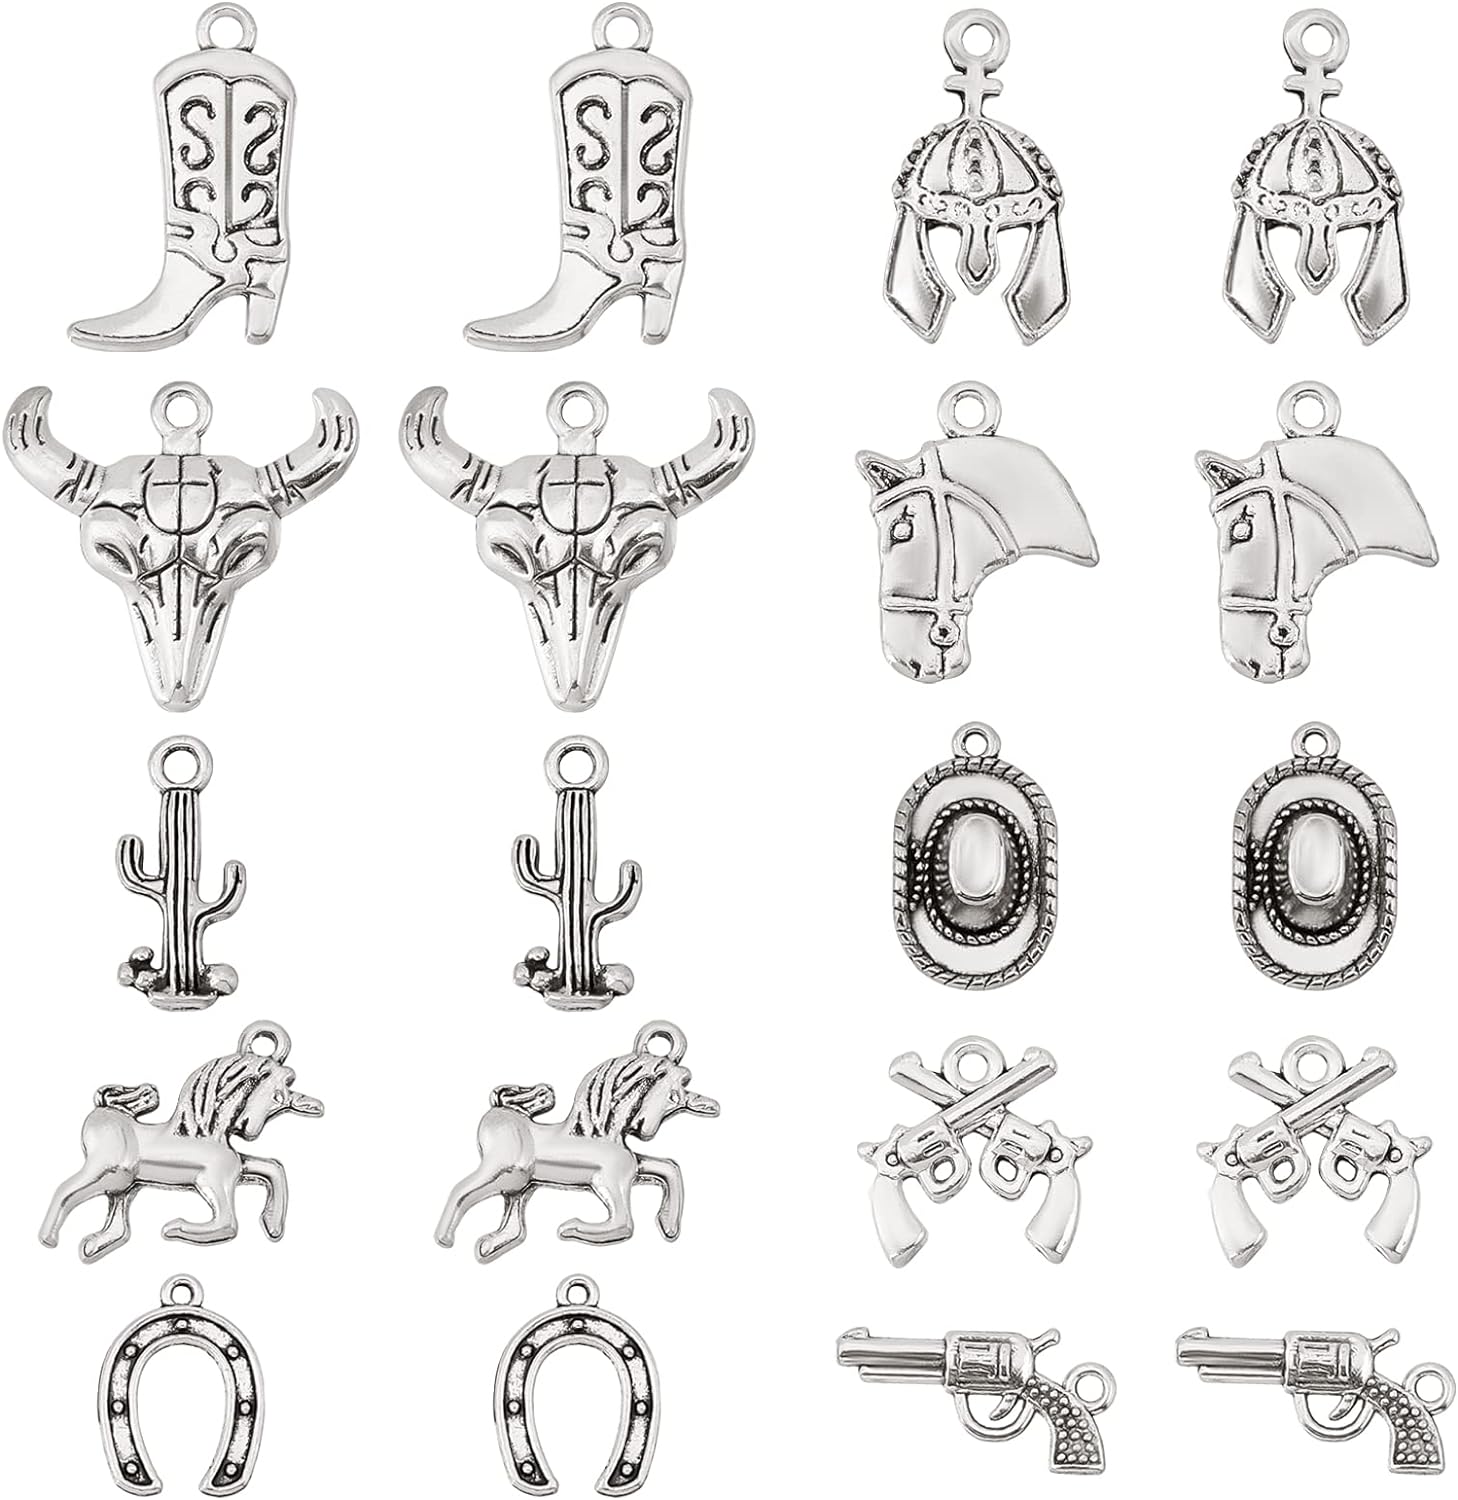 60pcs Vintage Silver Western Cowboy Charms Alloy Pendants Horse Hat Cactus  Cowboy Boot Charms Accessories For Bracelet Earrings Necklace Jewelry Makin